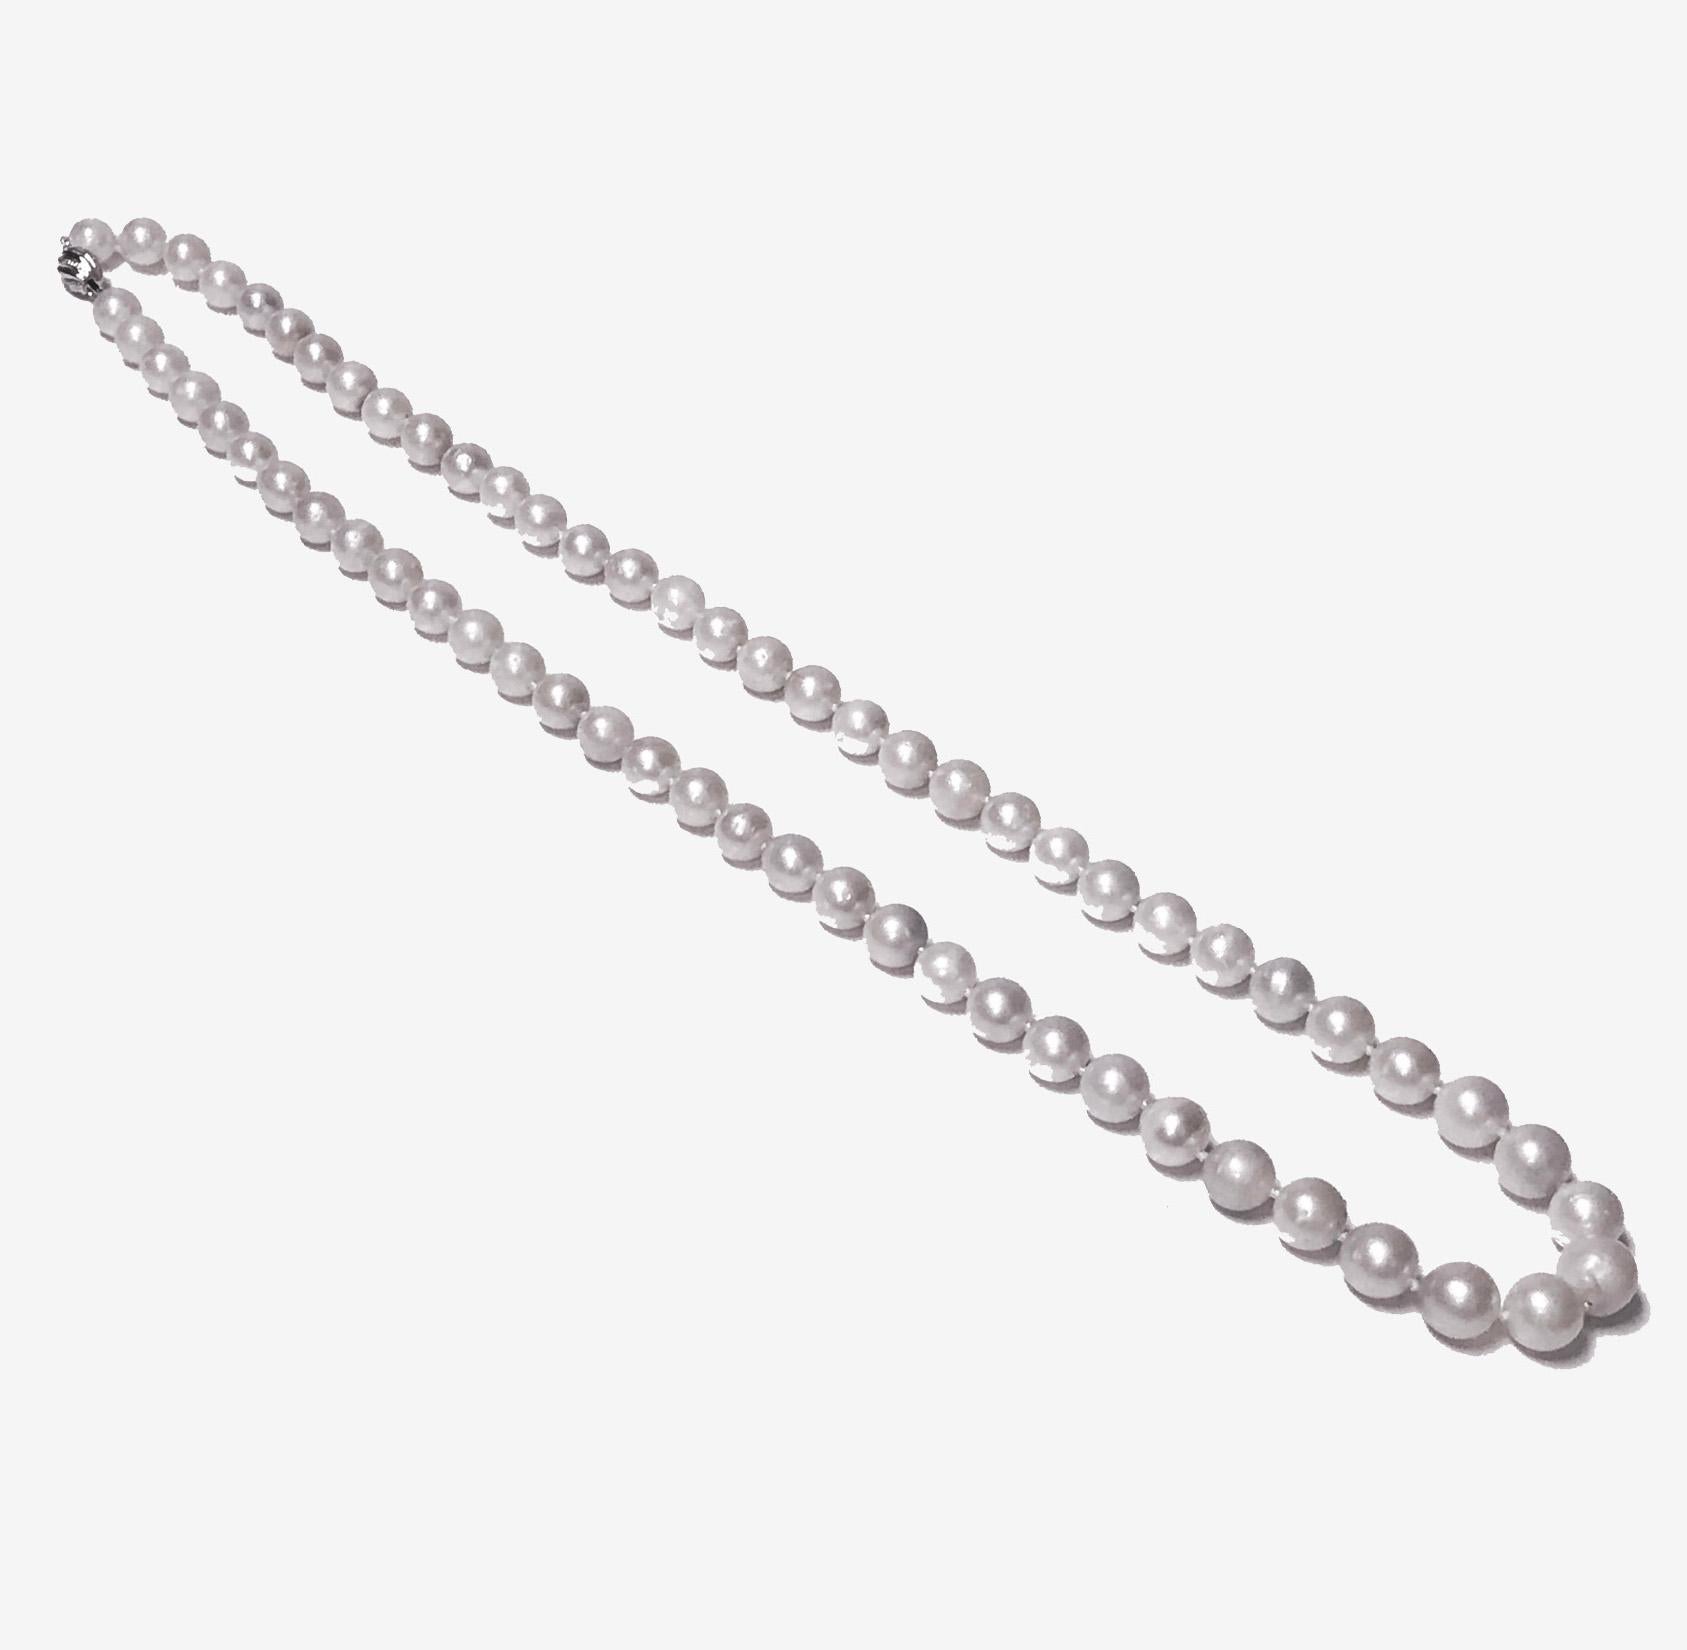 South Sea Cultured Pearls Necklace (knotted). The Necklace comprising 65 slightly off round silver white south sea cultured pearls. Pearls gauging approximately 11.50 - 14.50 mm, blemishes, medium lustre, medium - thick nacre, 14K white gold and